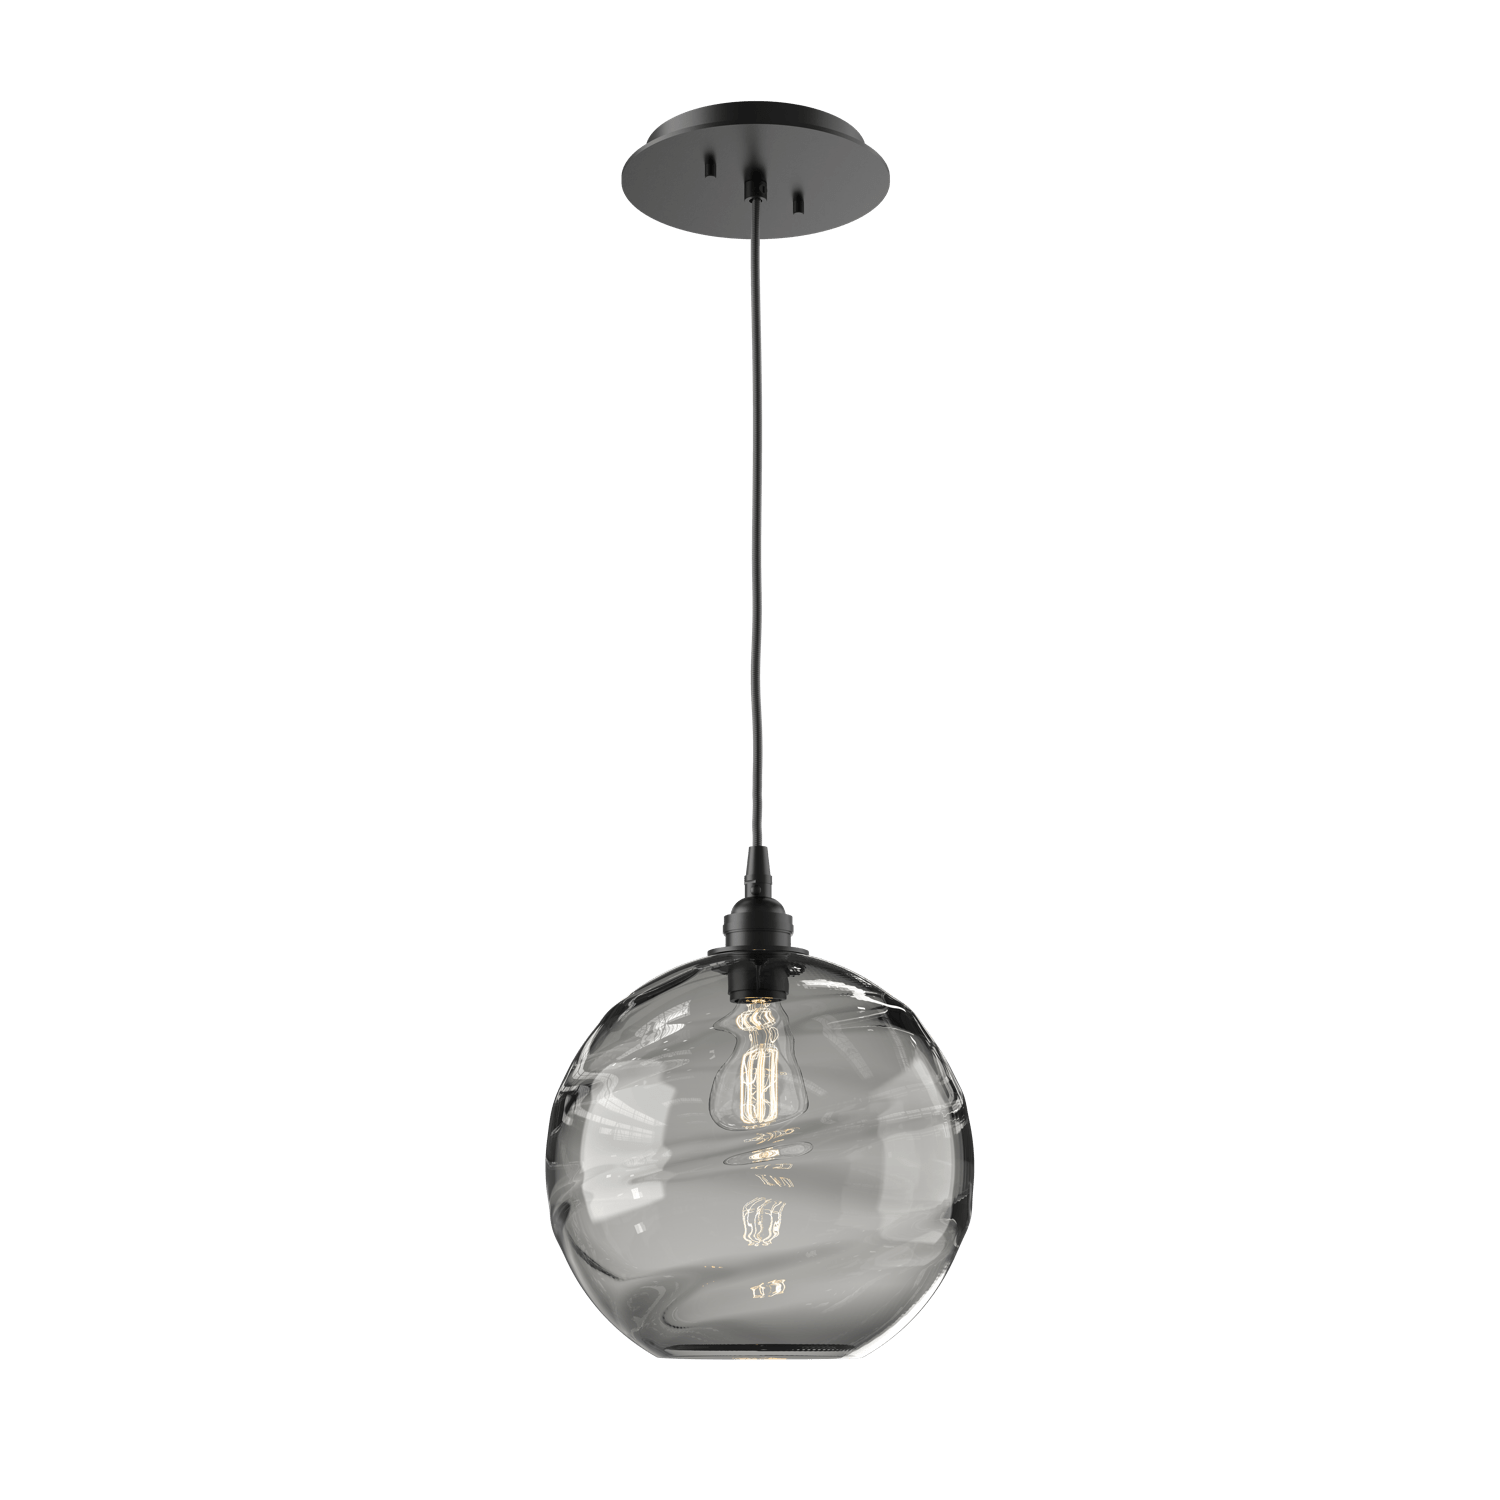 LAB0047-01-MB-OS-Hammerton-Studio-Optic-Blown-Glass-Terra-pendant-light-with-matte-black-finish-and-optic-smoke-blown-glass-shades-and-incandescent-lamping